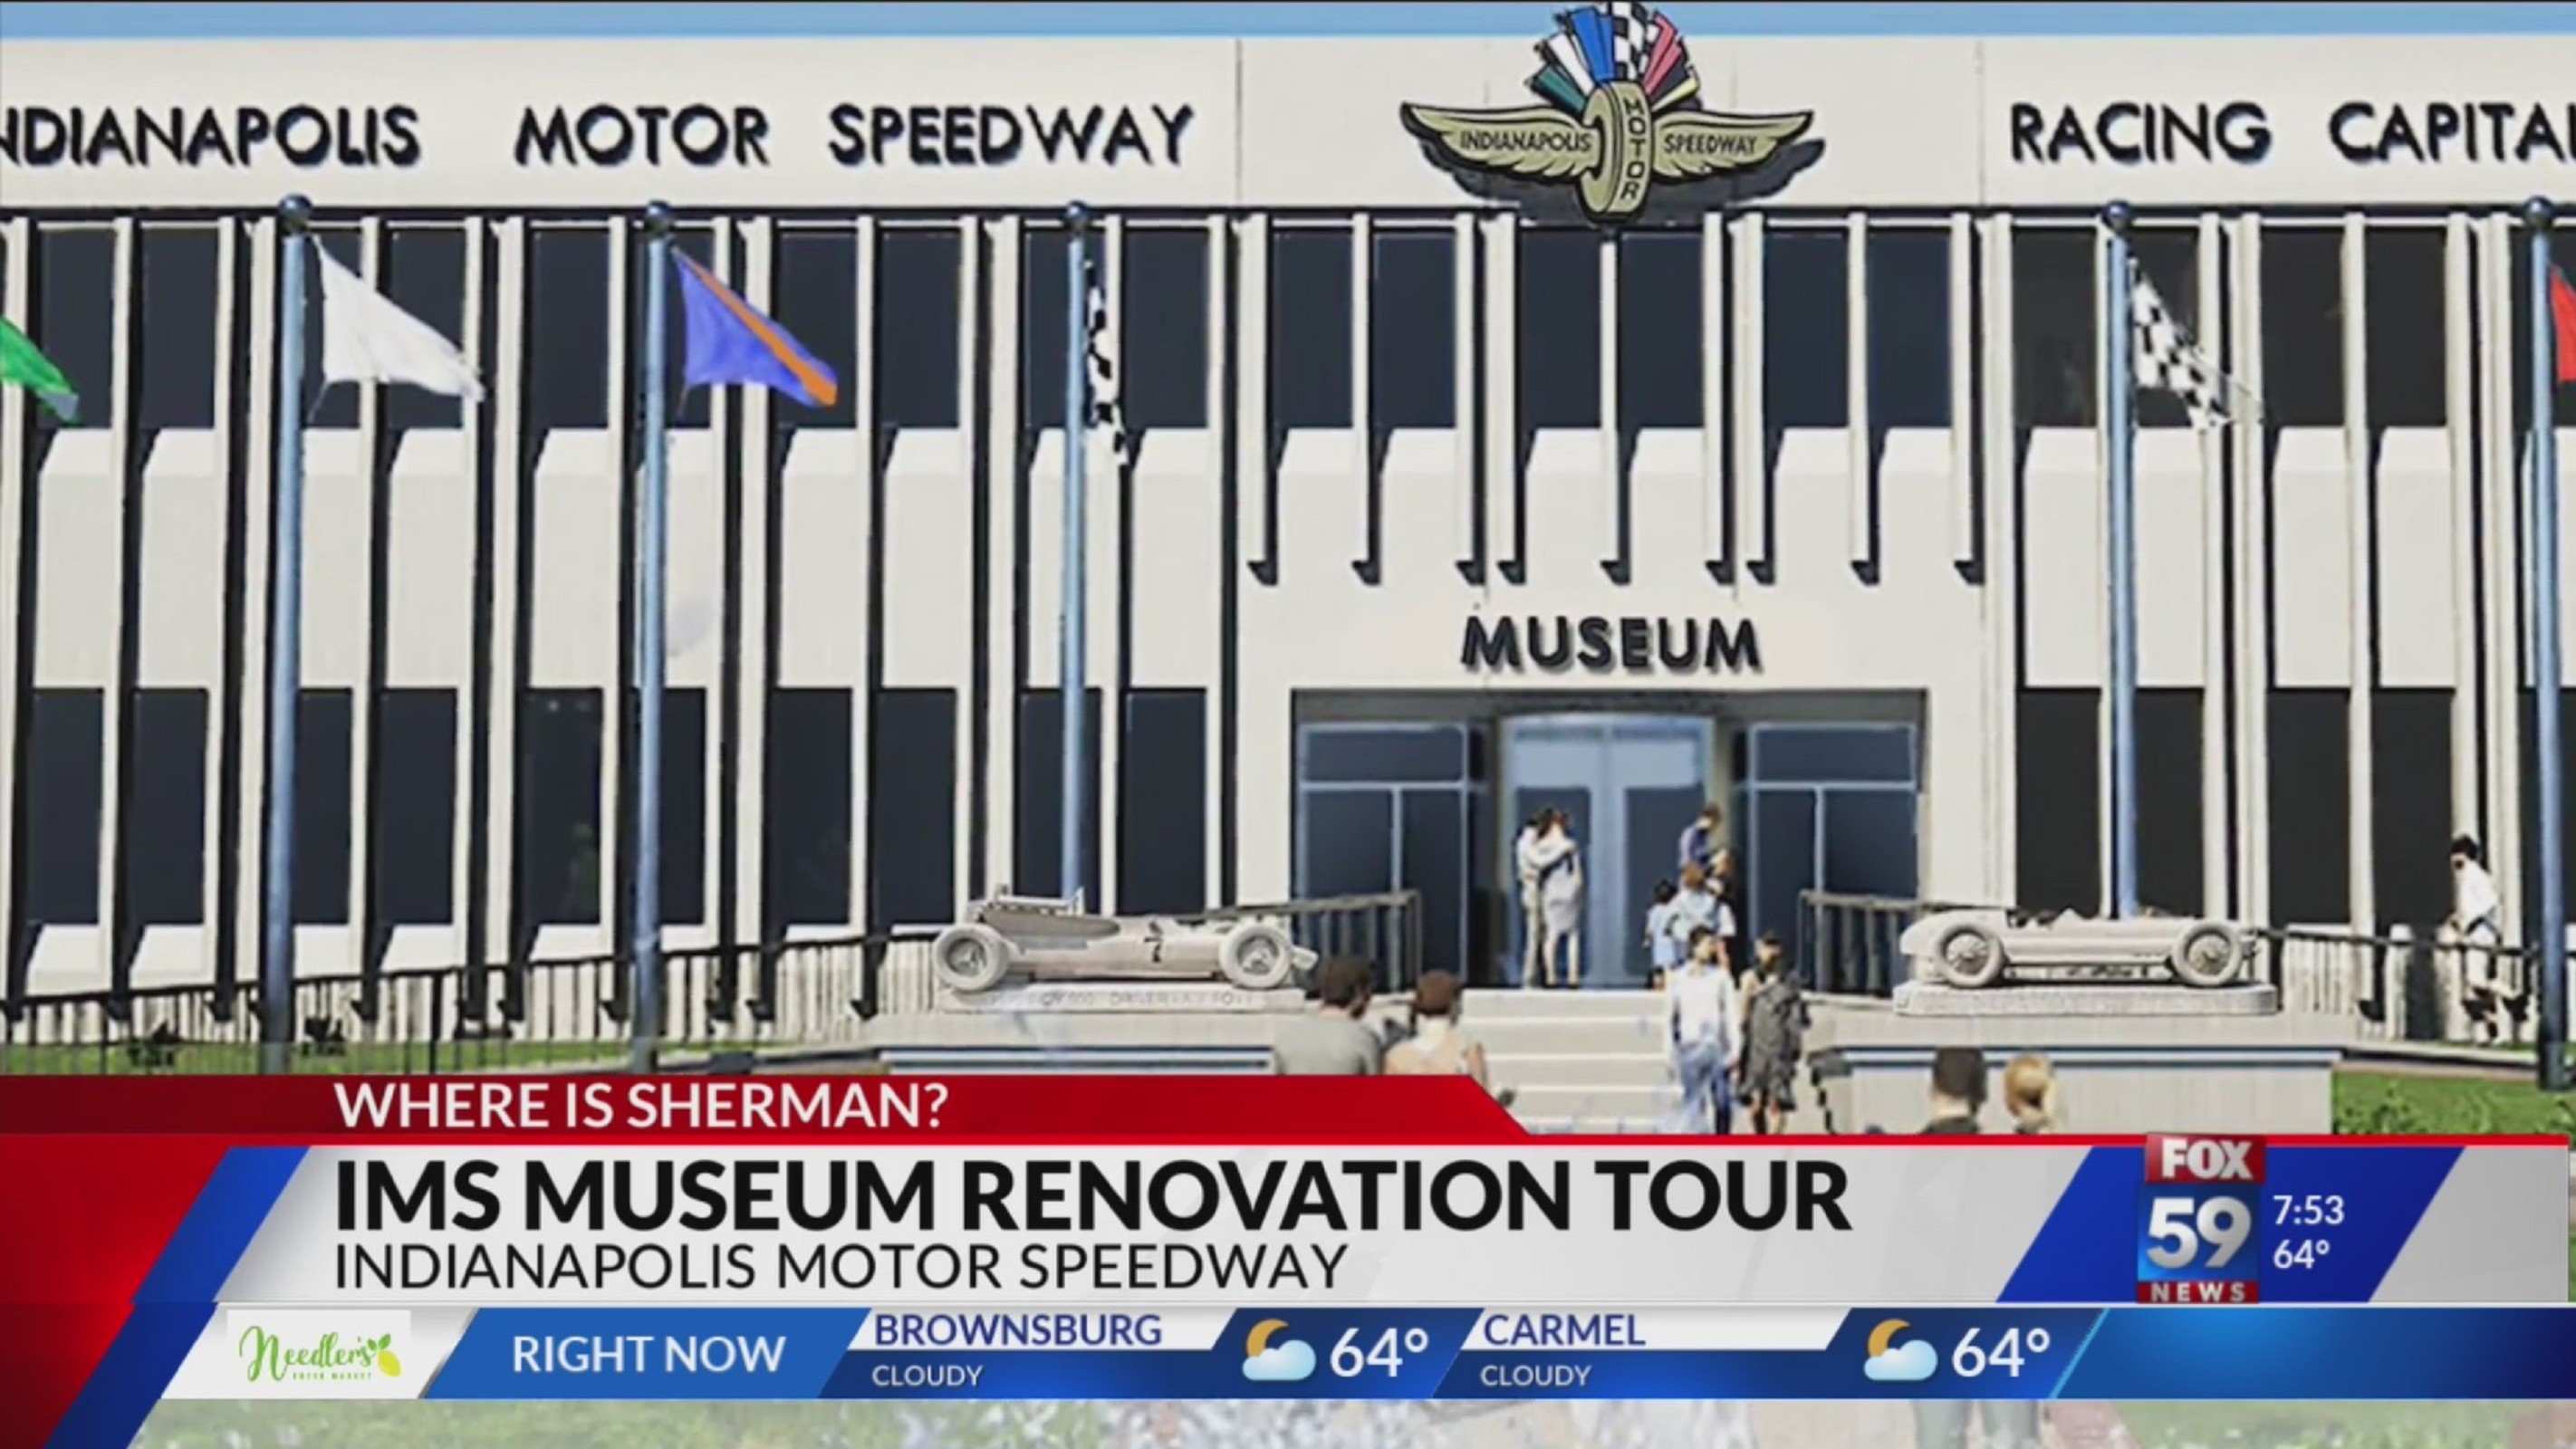 Where is Sherman? IMS Museum Renovation Tour at Indianapolis Motor Speedway